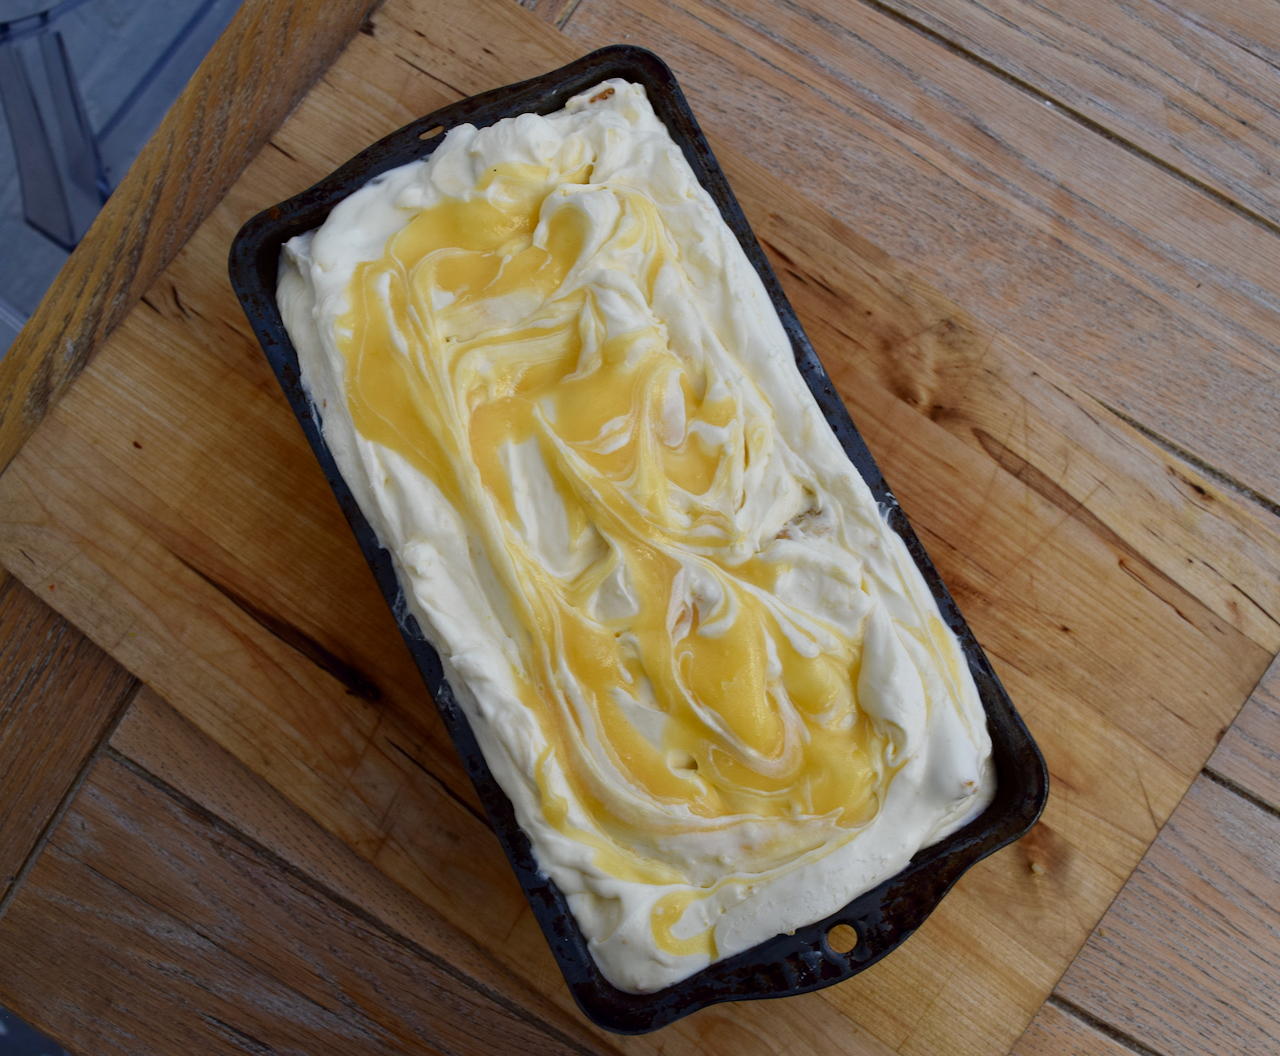 Homemade Lemon Curd Ice Cream recipe from Lucy Loves Food Blog